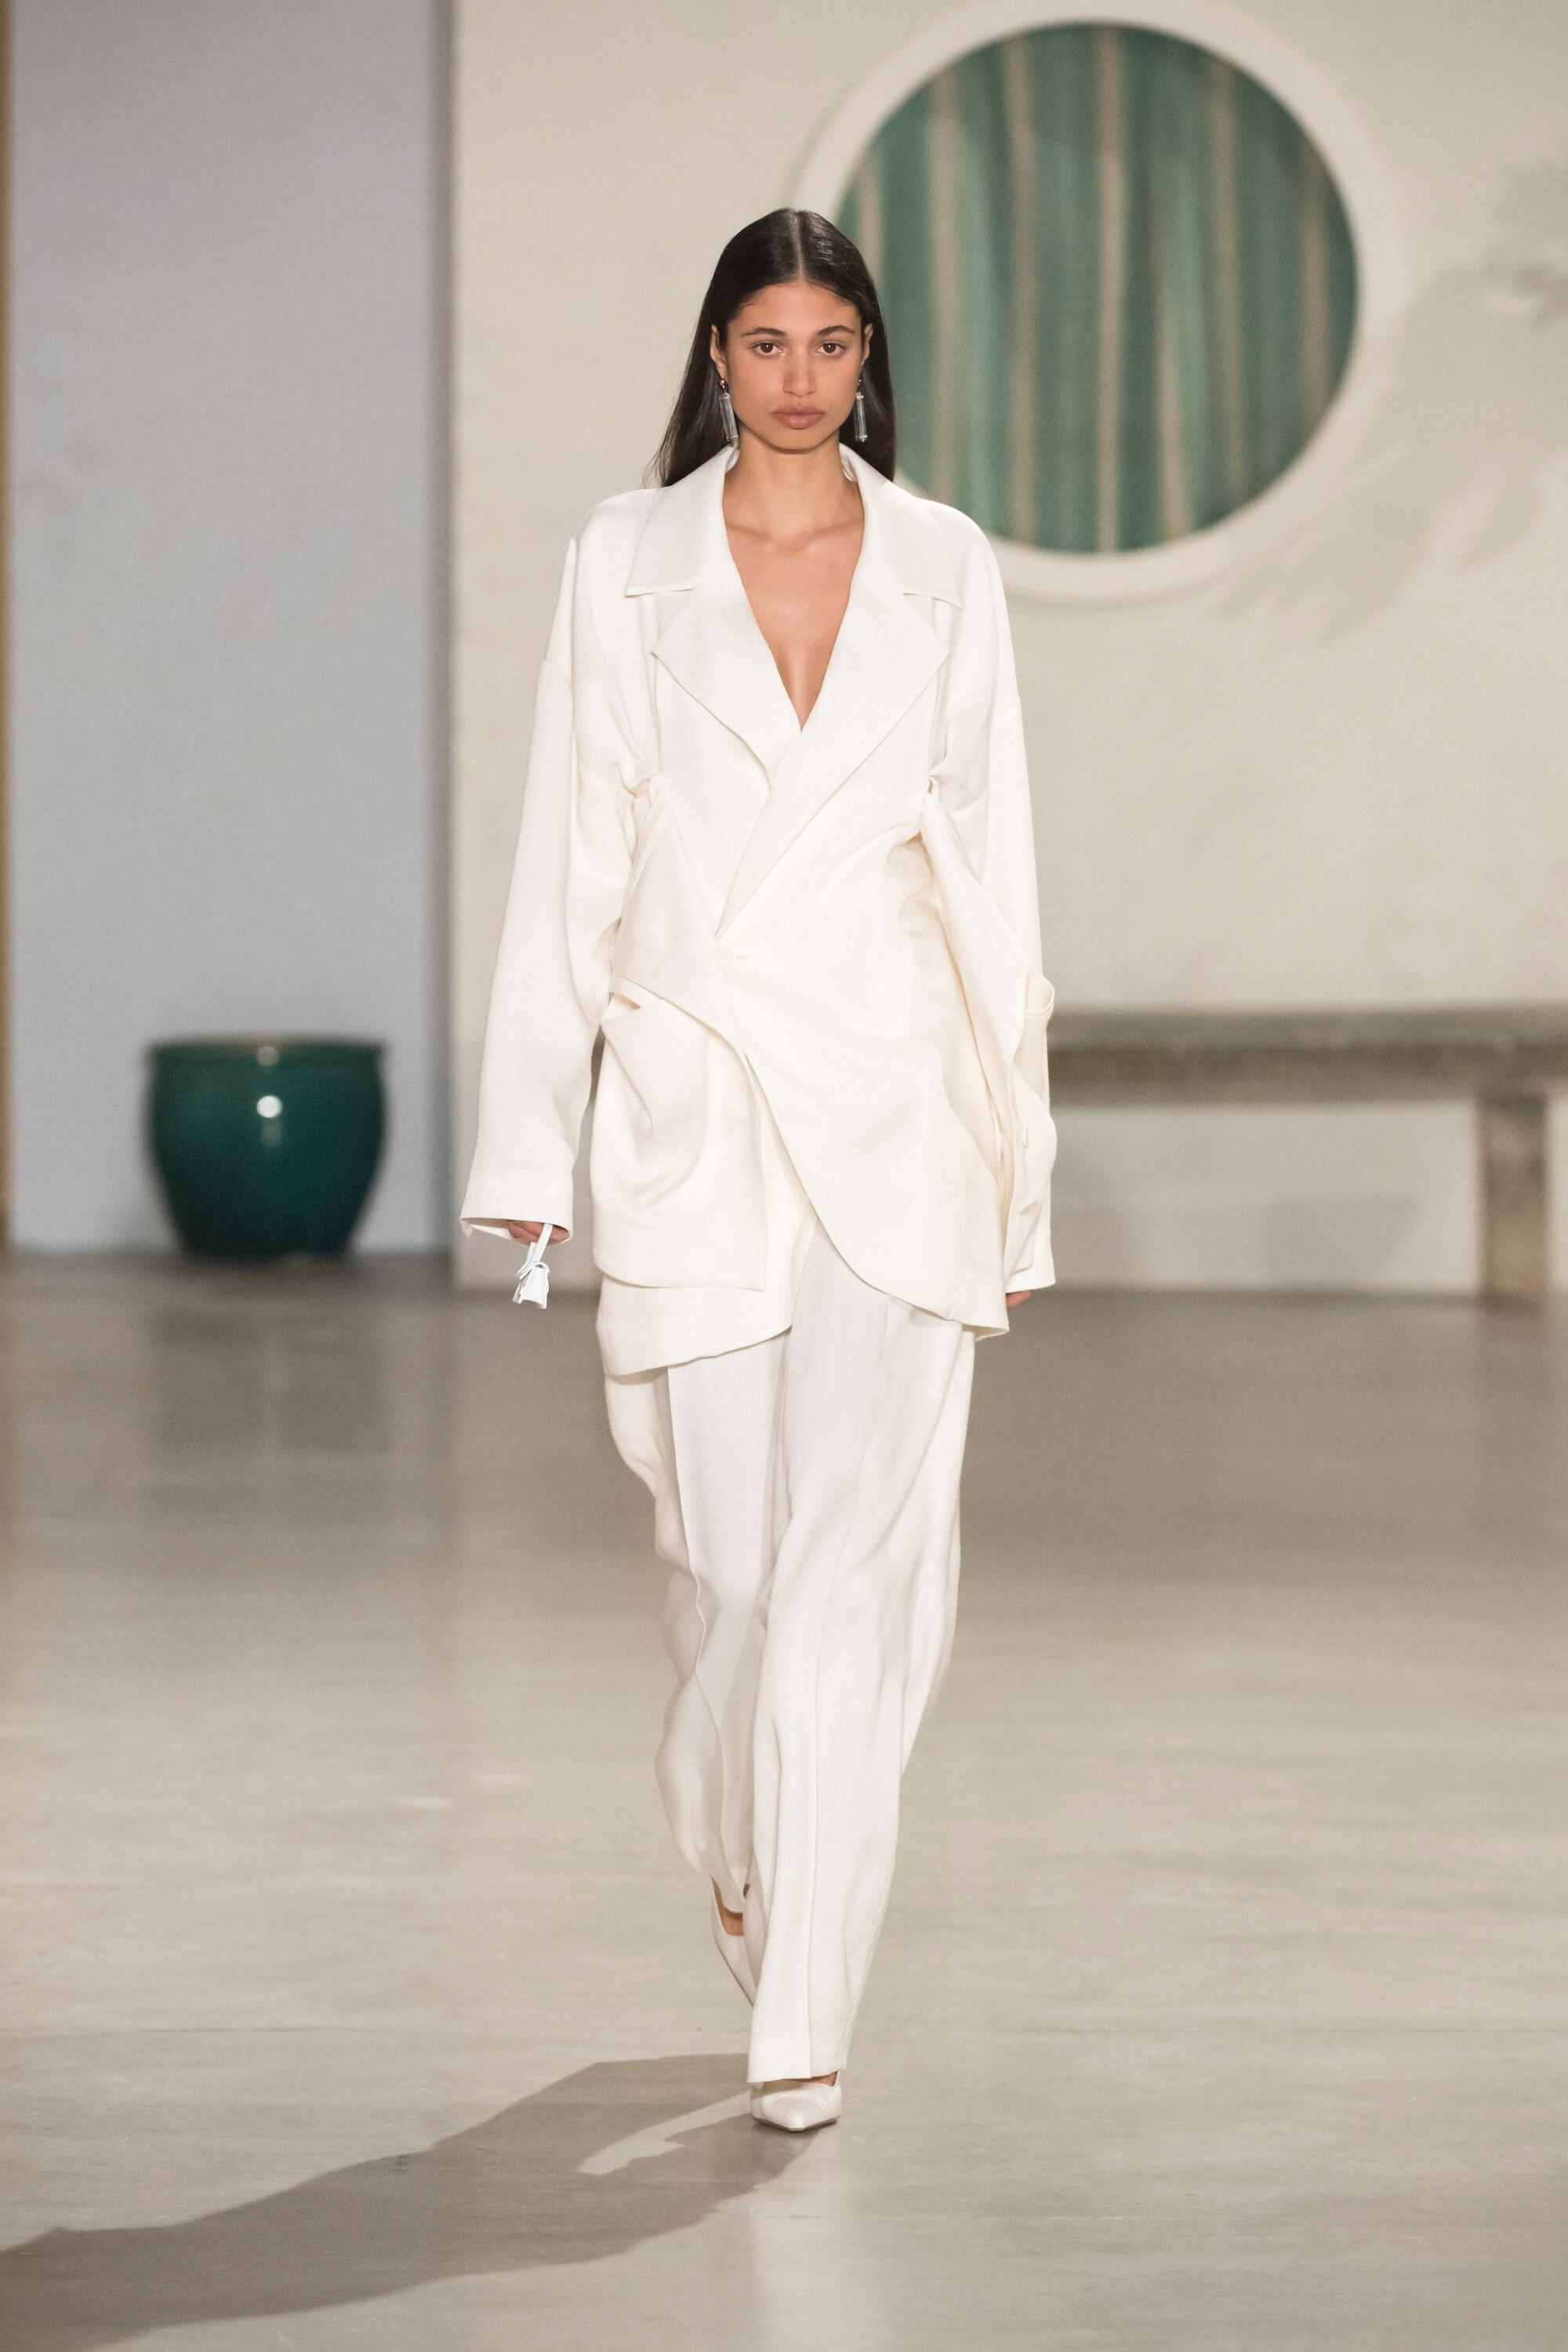 Jacquemus Les Chaussures Leon Leather Pumps in White - Lyst